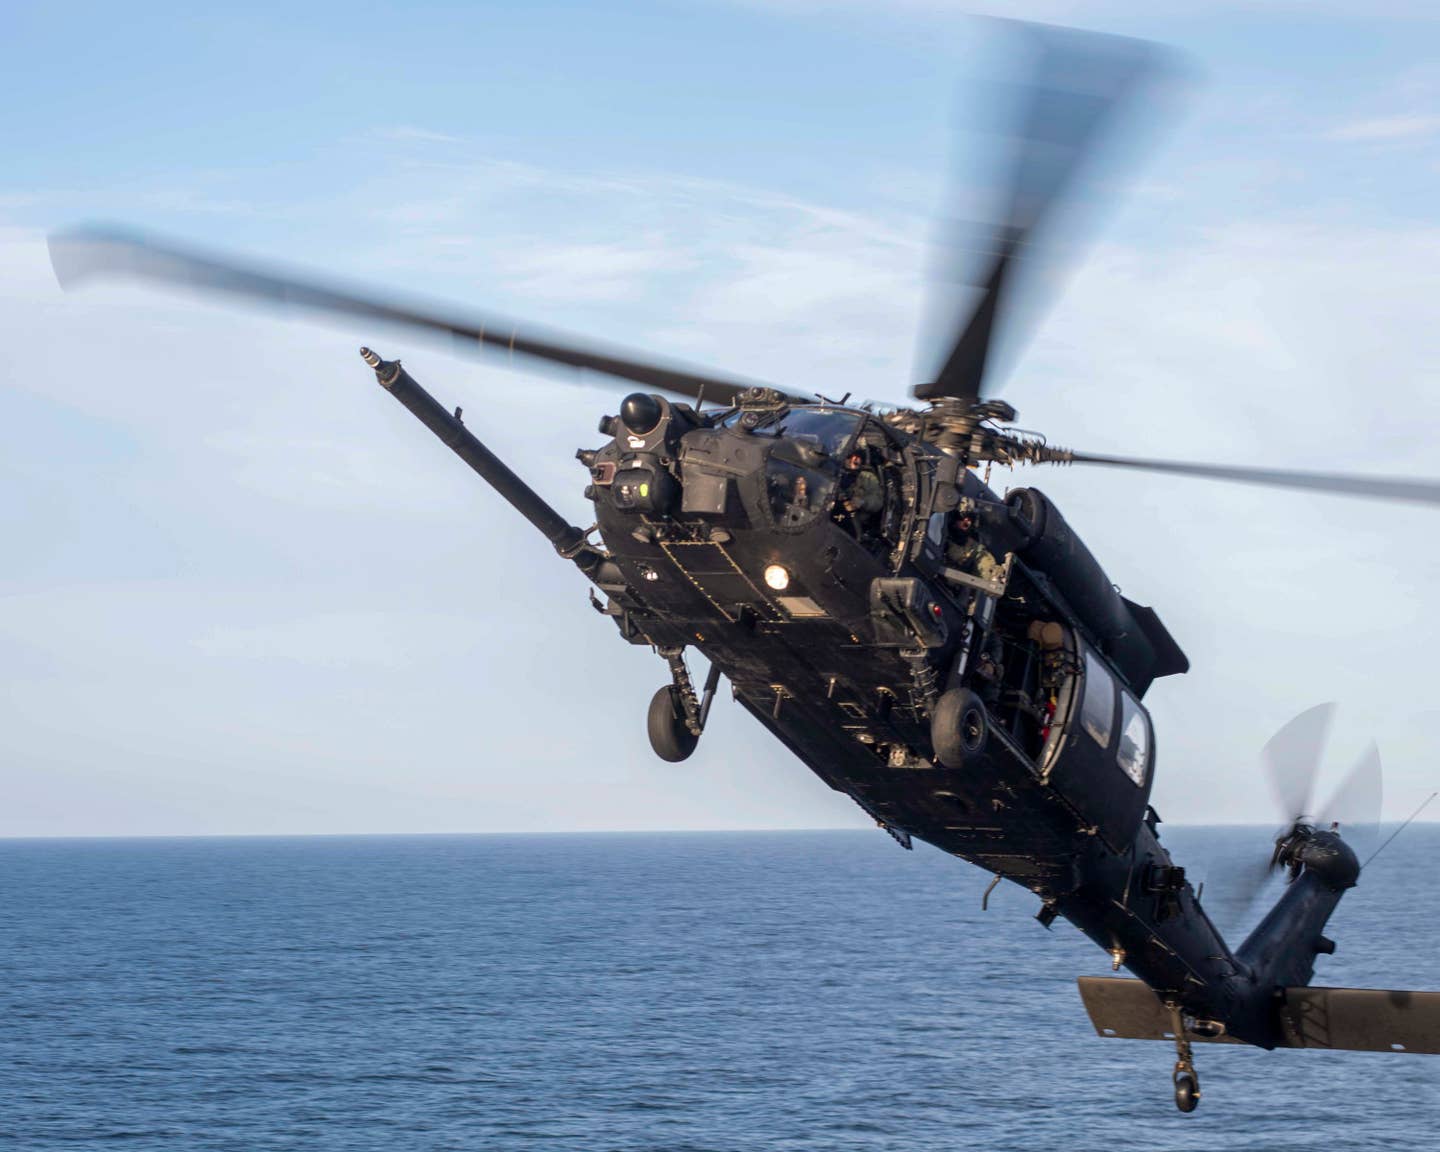 Dispensers capable of launching decoy flares and chaff can be seen on the tail boom in this picture of one of the 160th SOAR's MH-60Ms taking part in Polar Dagger. <em>USN</em>